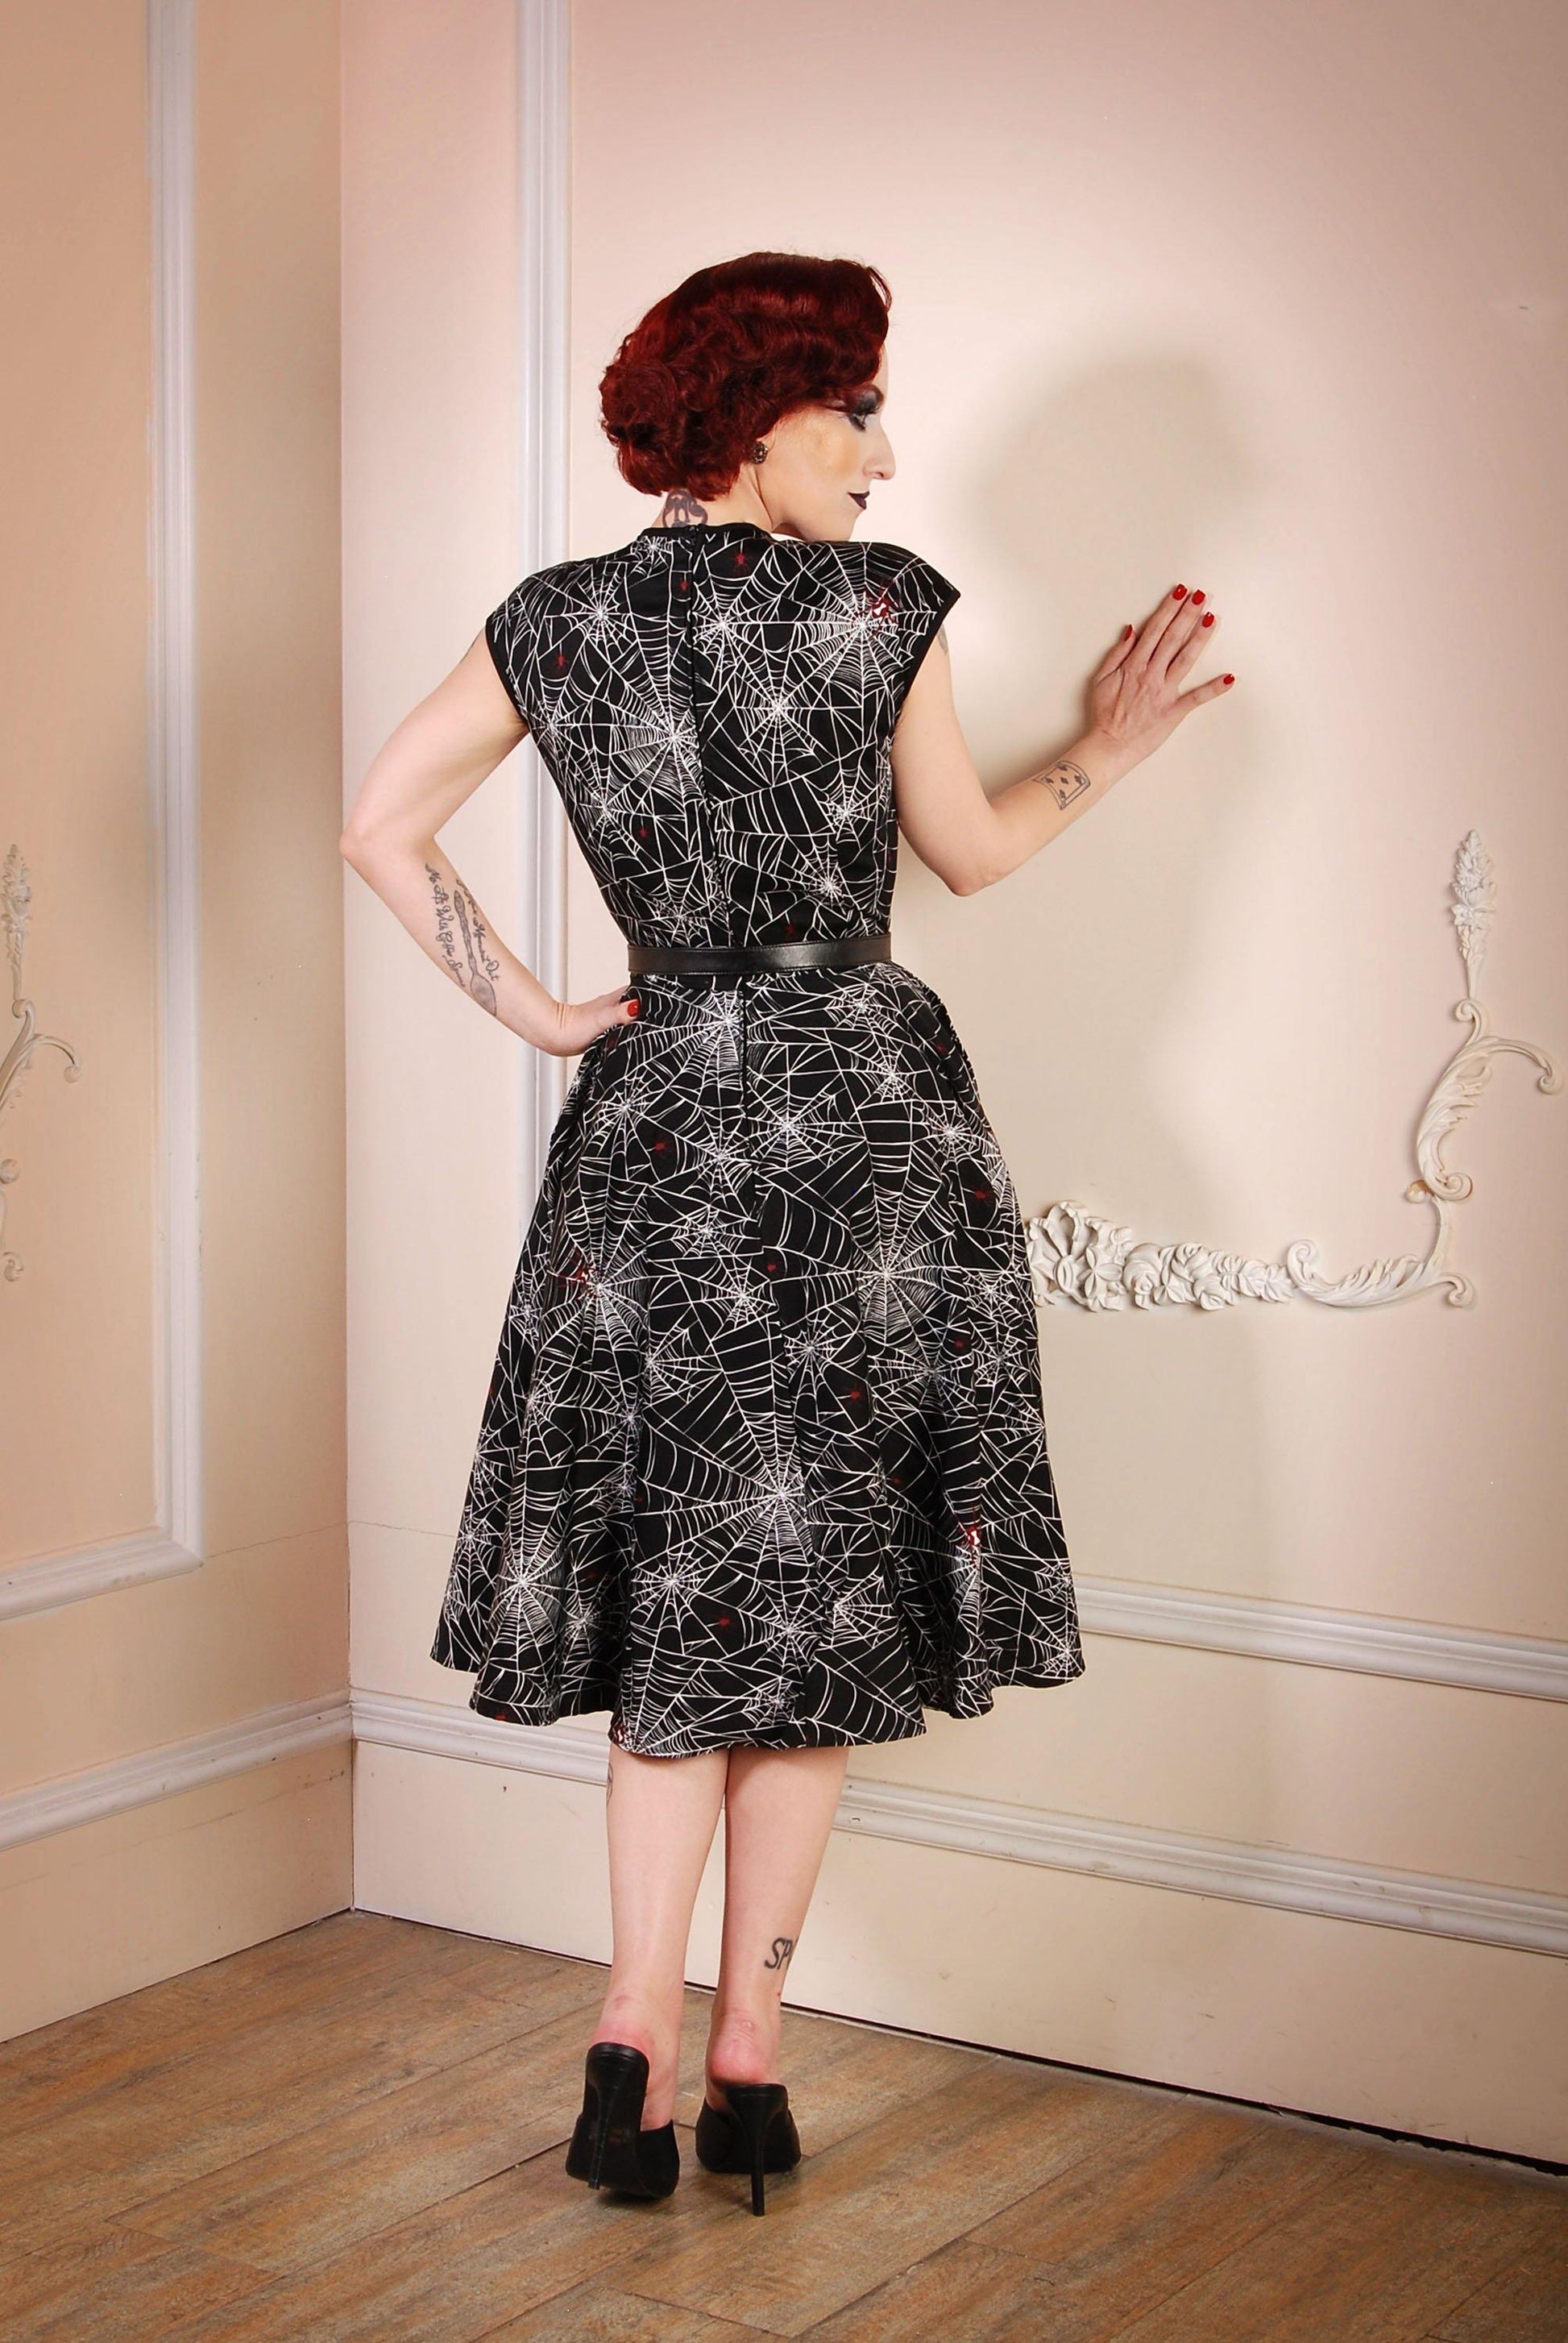 Heidi Vintage A-Line Dress in Black Widow Spiderweb Cotton Sateen | Pinup Couture - pinupgirlclothing.com